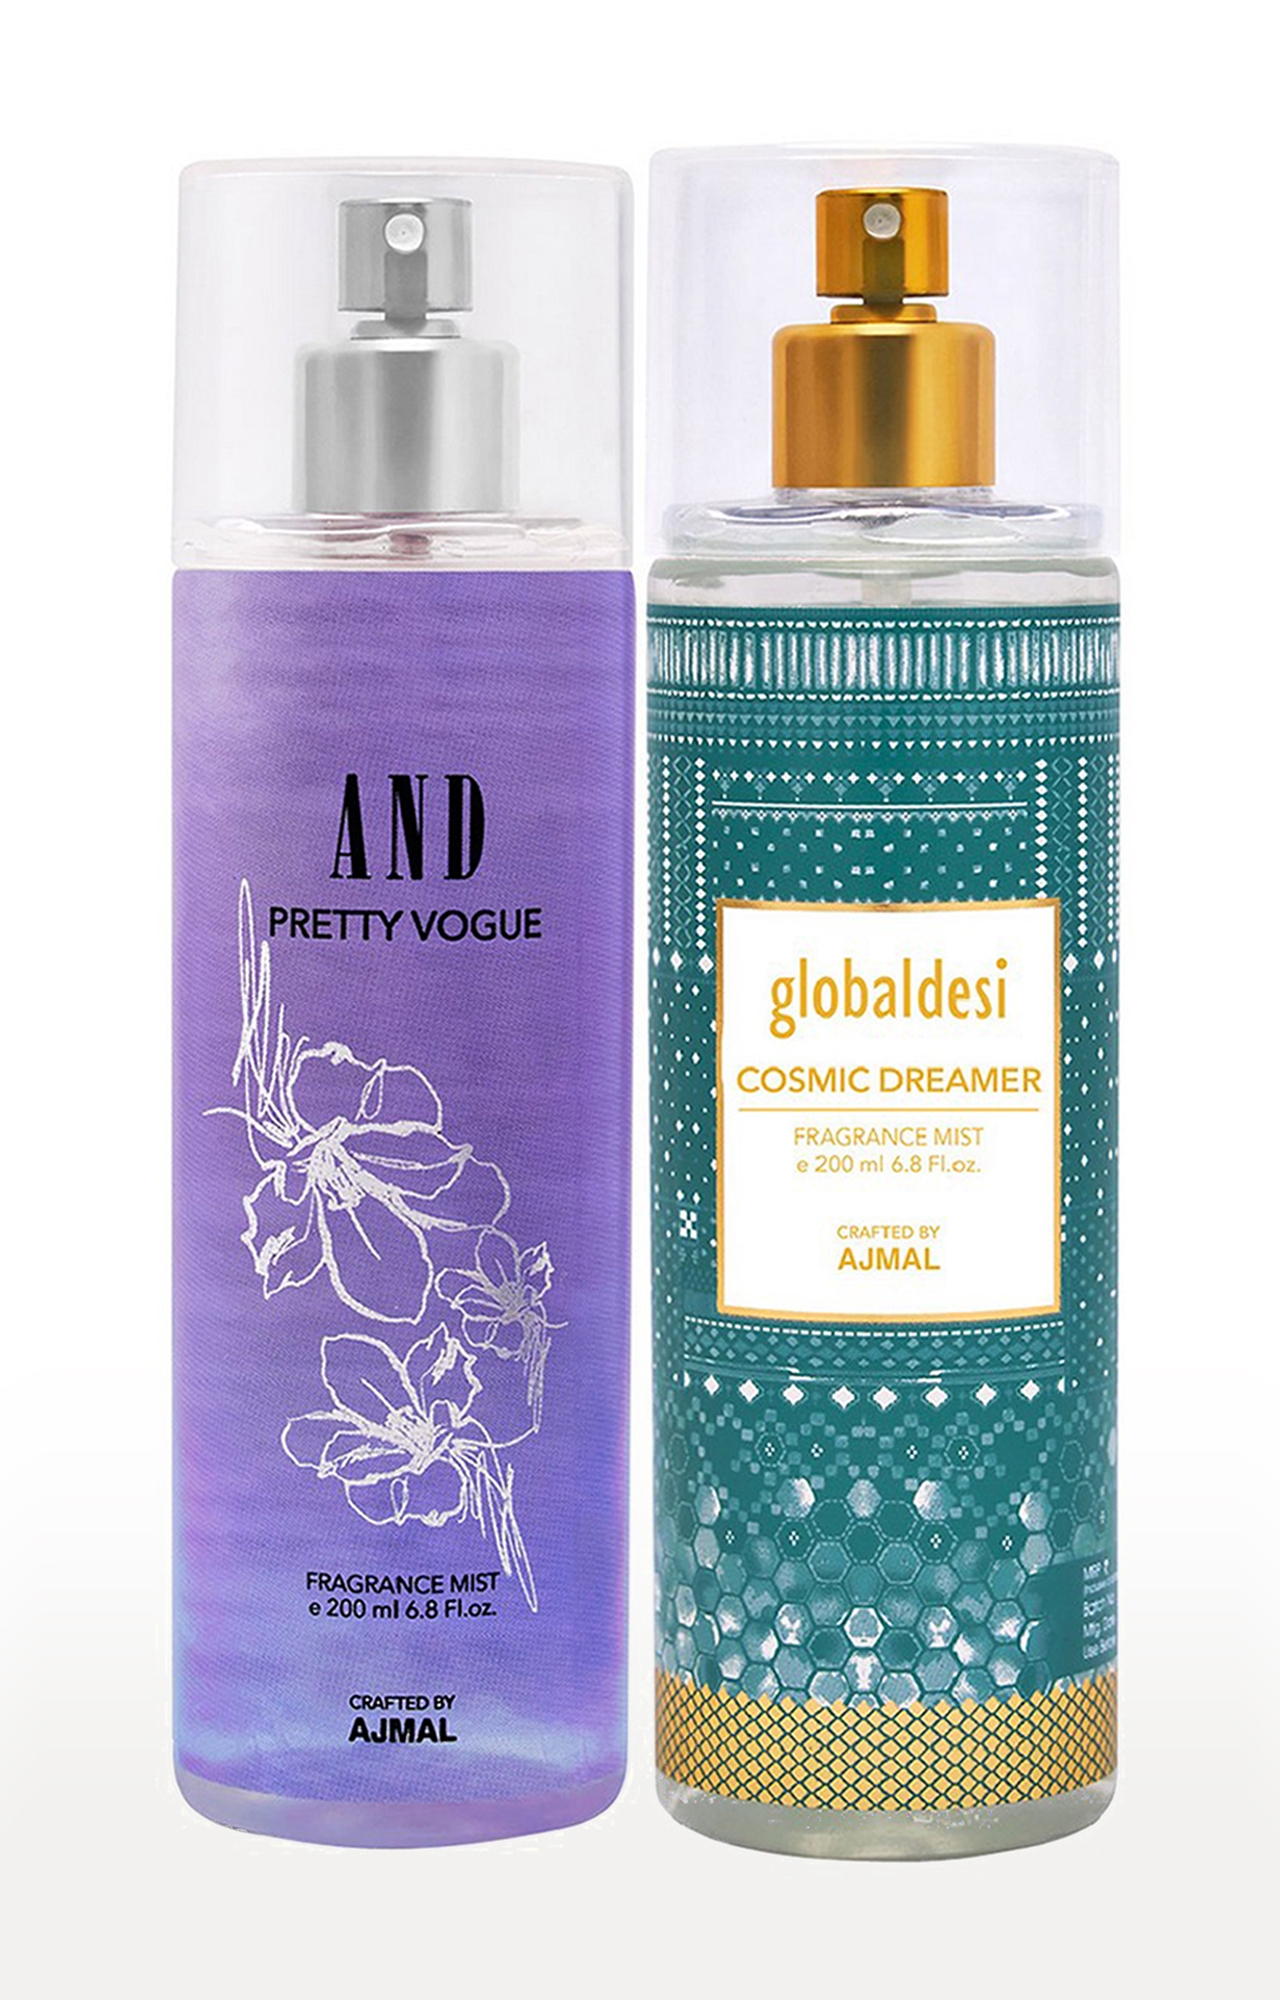 AND Crafted By Ajmal | AND Pretty Vogue Body Mist 200ML & Global Desi Cosmic Dreamer Body Mist 200ML Long Lasting Scent Spray Gift For Women Perfume FREE 0